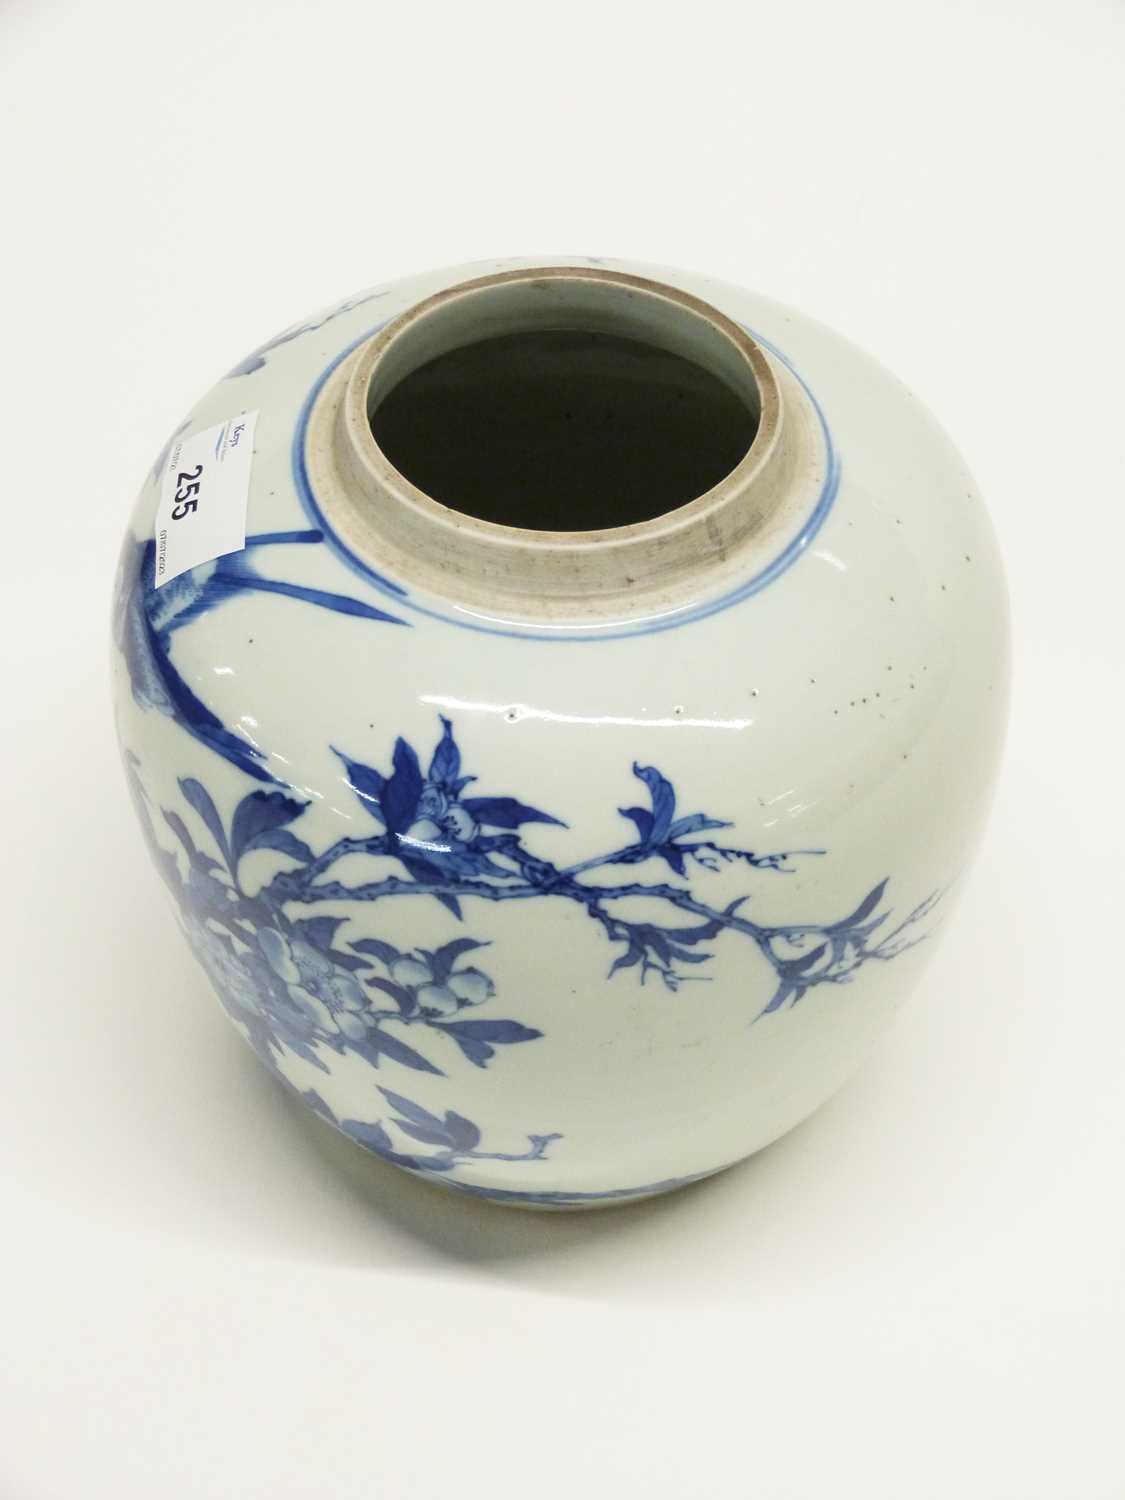 Qing Dynasty Chinese porcelain ginger jar (lacking cover), decorated in blue and white with birds on - Image 3 of 9